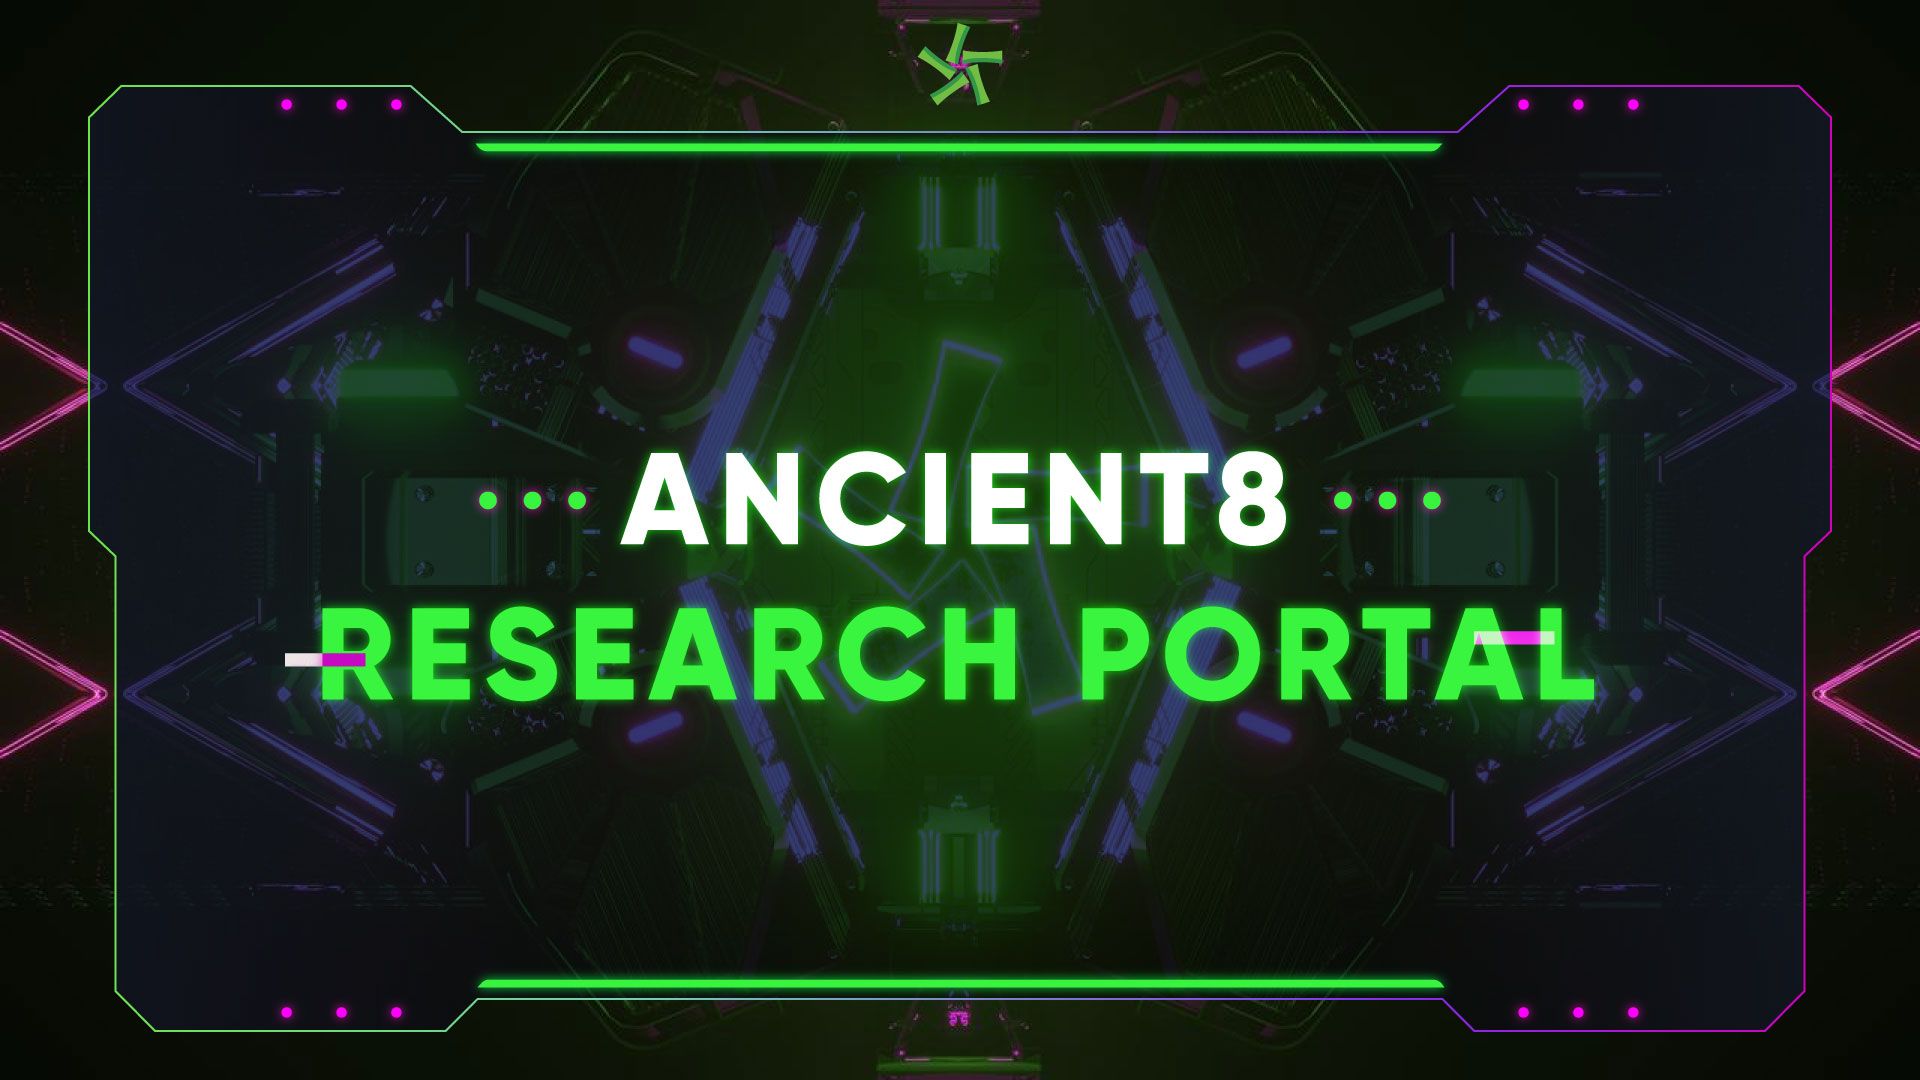 INTRODUCING THE ANCIENT8 RESEARCH PORTAL